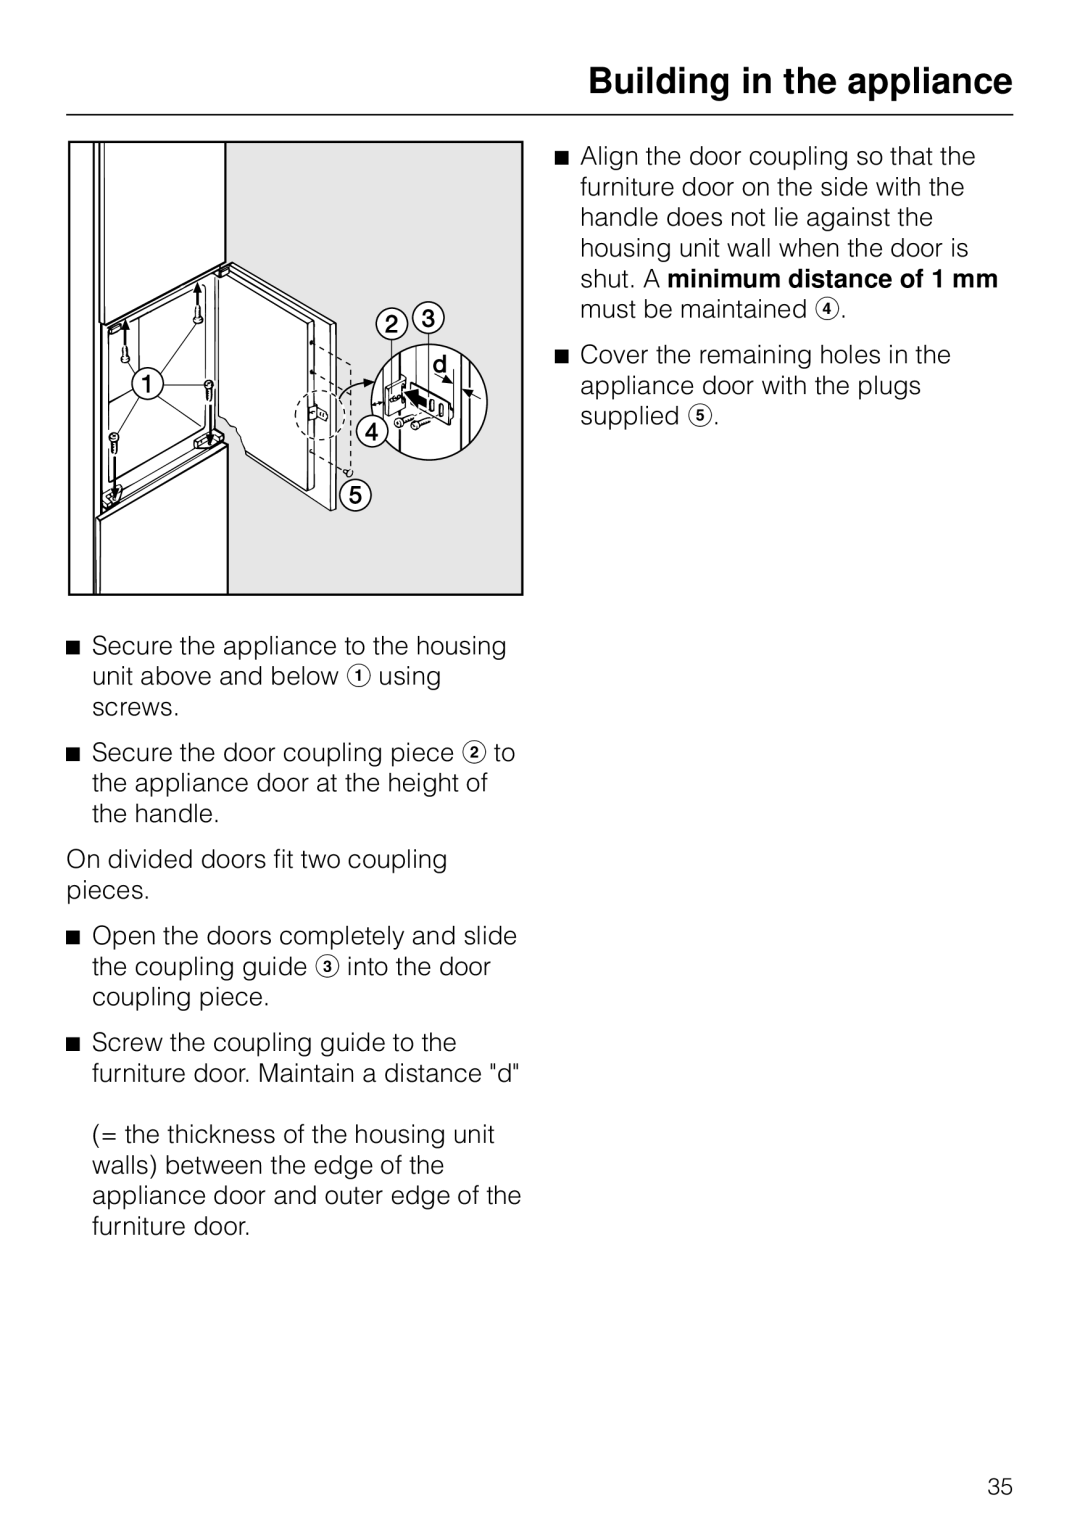 Miele F 311 i-6 installation instructions Building in the appliance, On divided doors fit two coupling pieces 